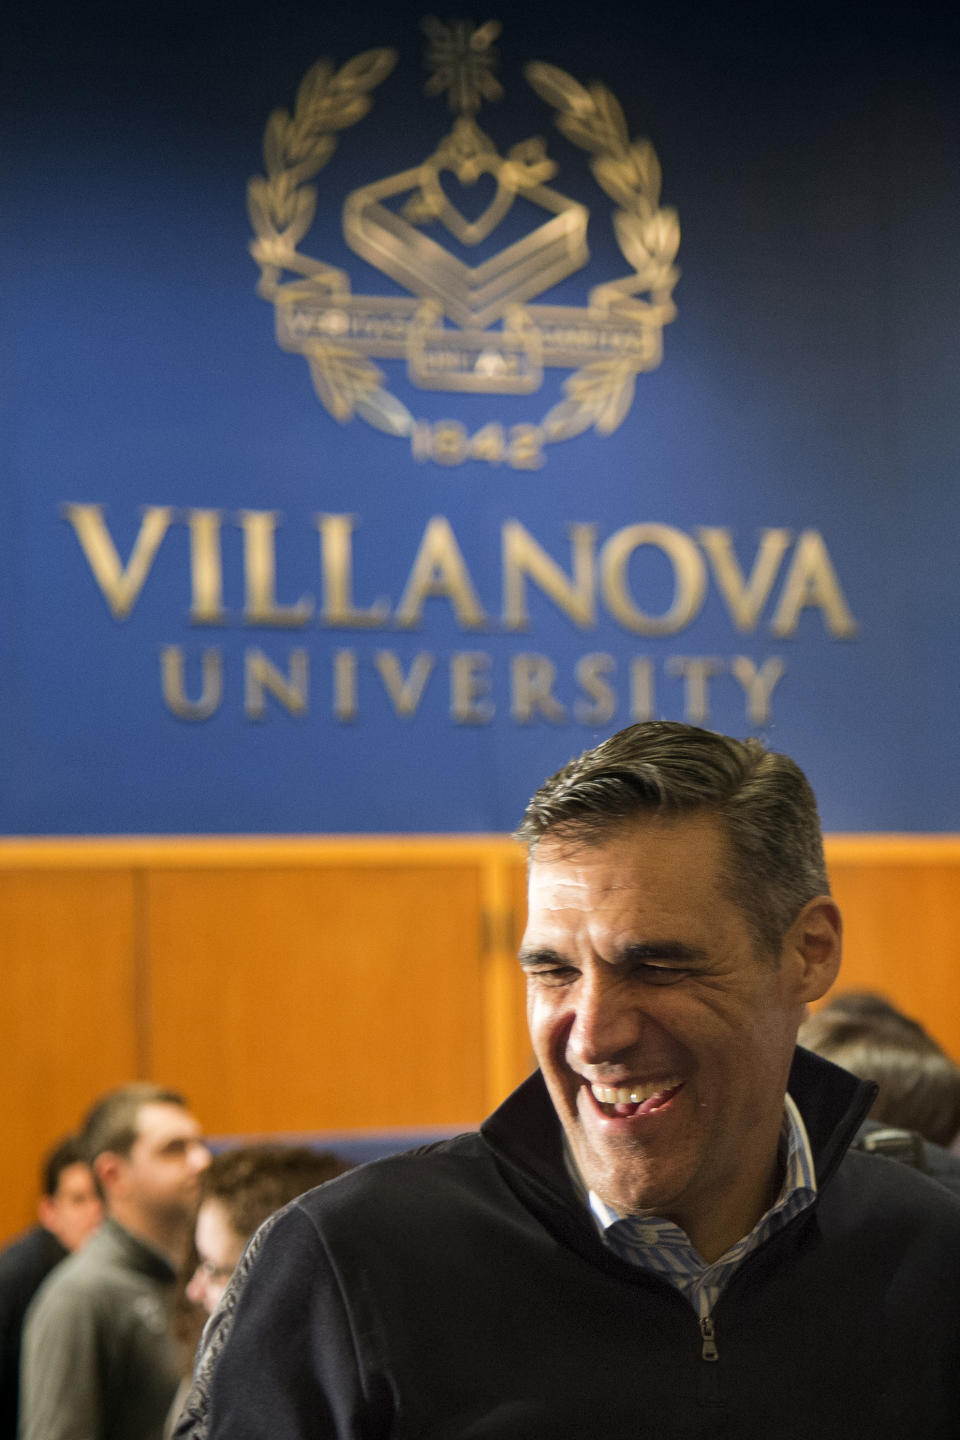 Villanova coach Jay Wright is greeted by fans as he leaves after watching the broadcast of the NCAA men's basketball tournament selection show Sunday, March 12, 2017, in Philadelphia. (Tom Gralish/The Philadelphia Inquirer via AP)